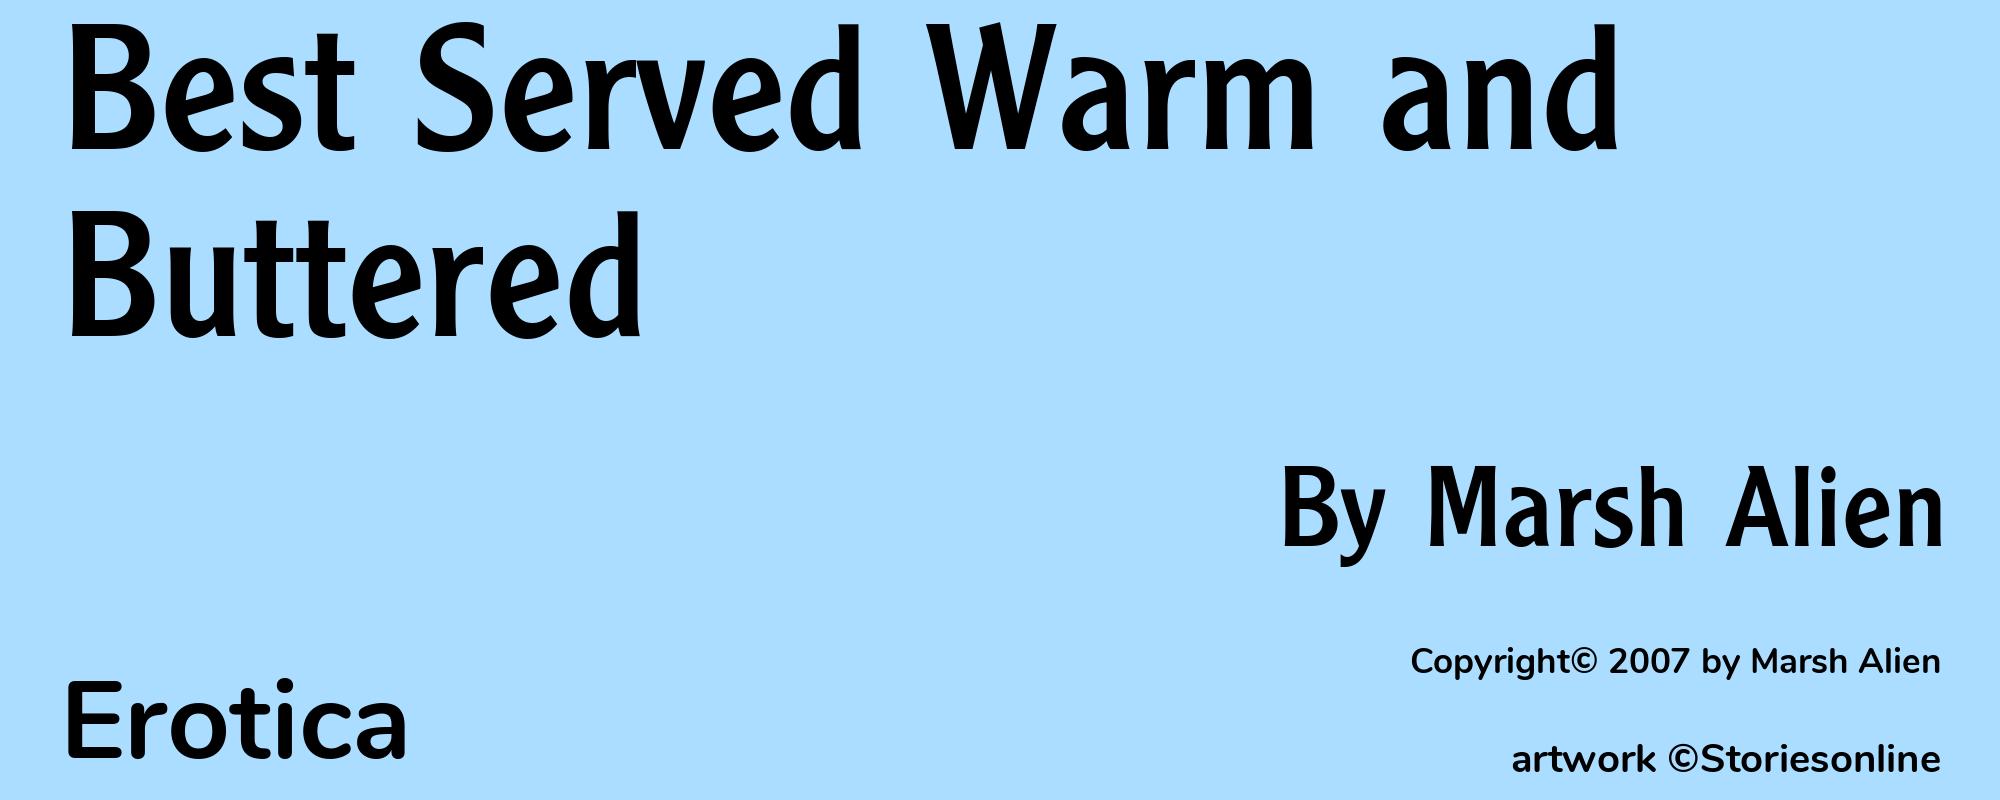 Best Served Warm and Buttered - Cover